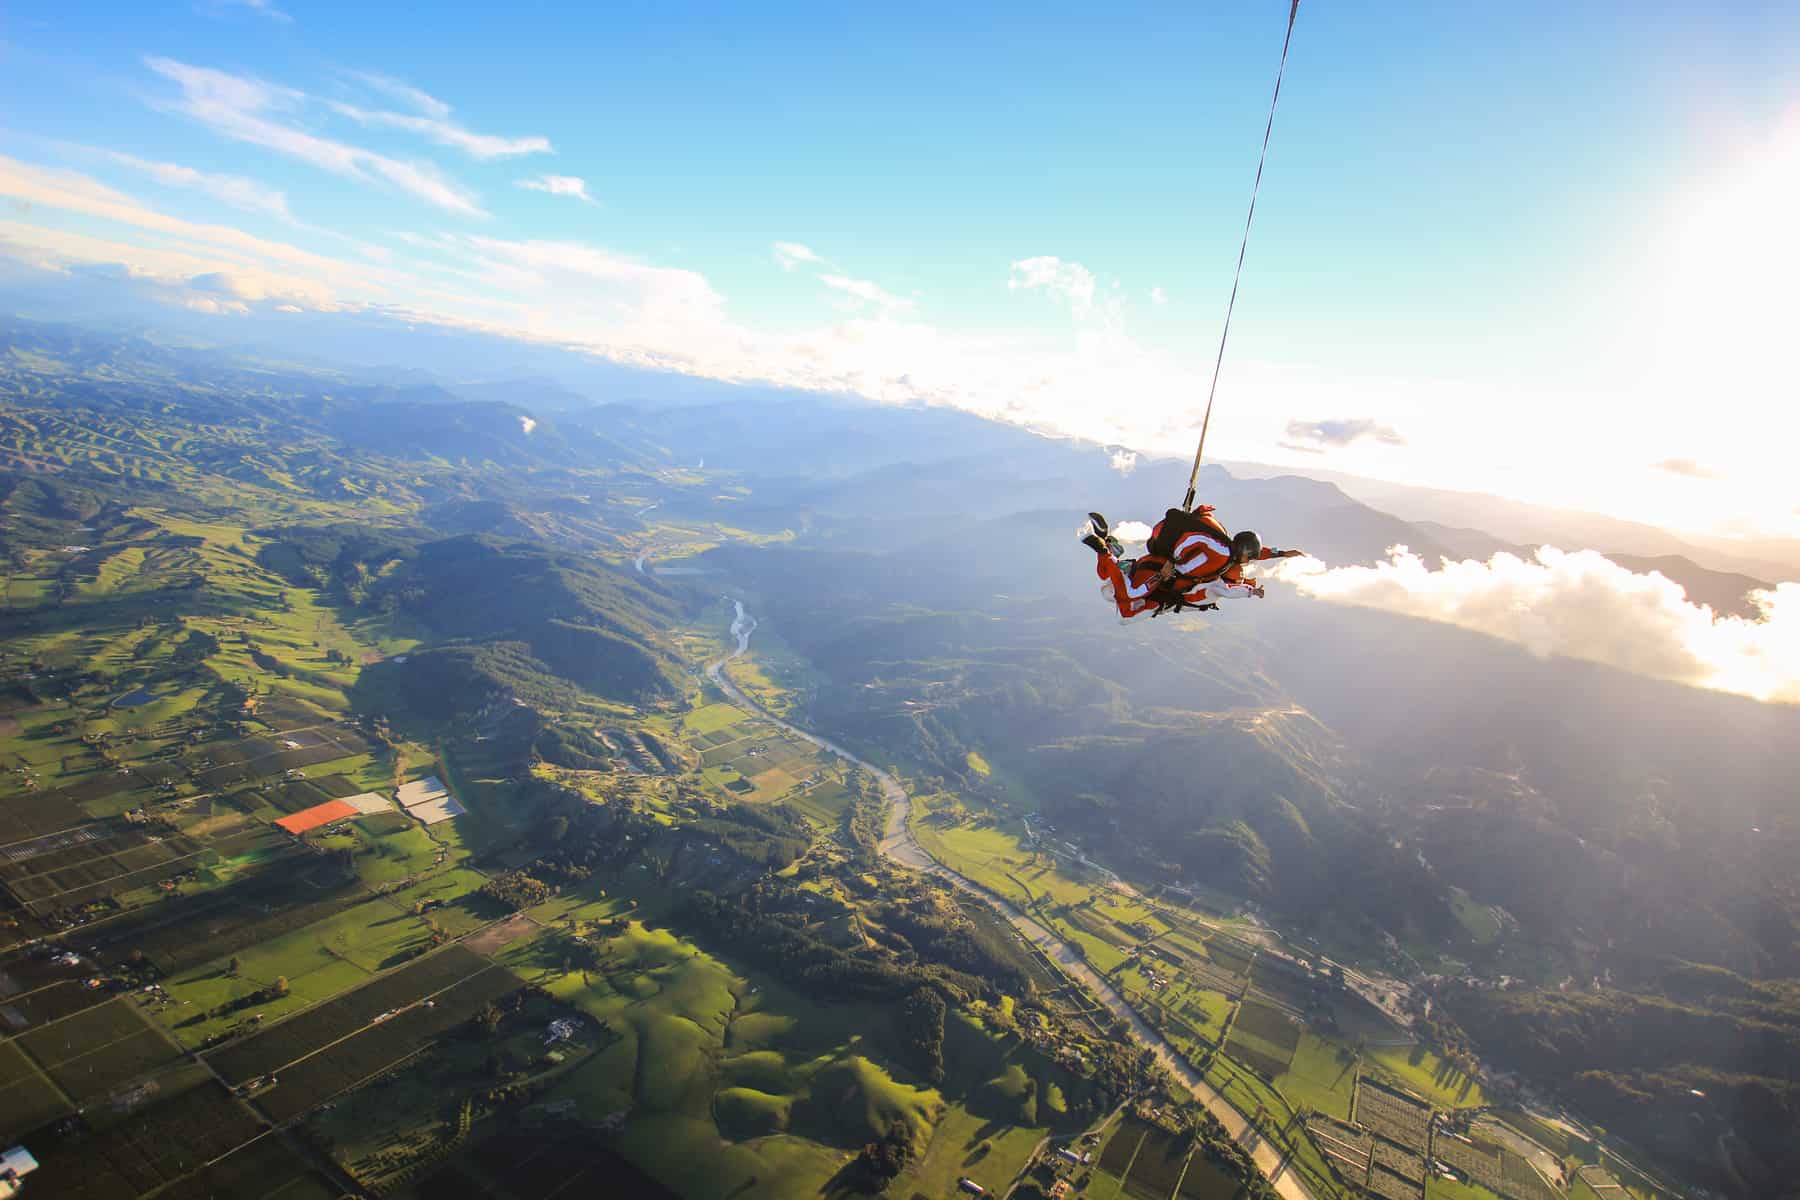 Sky diving above the mountains